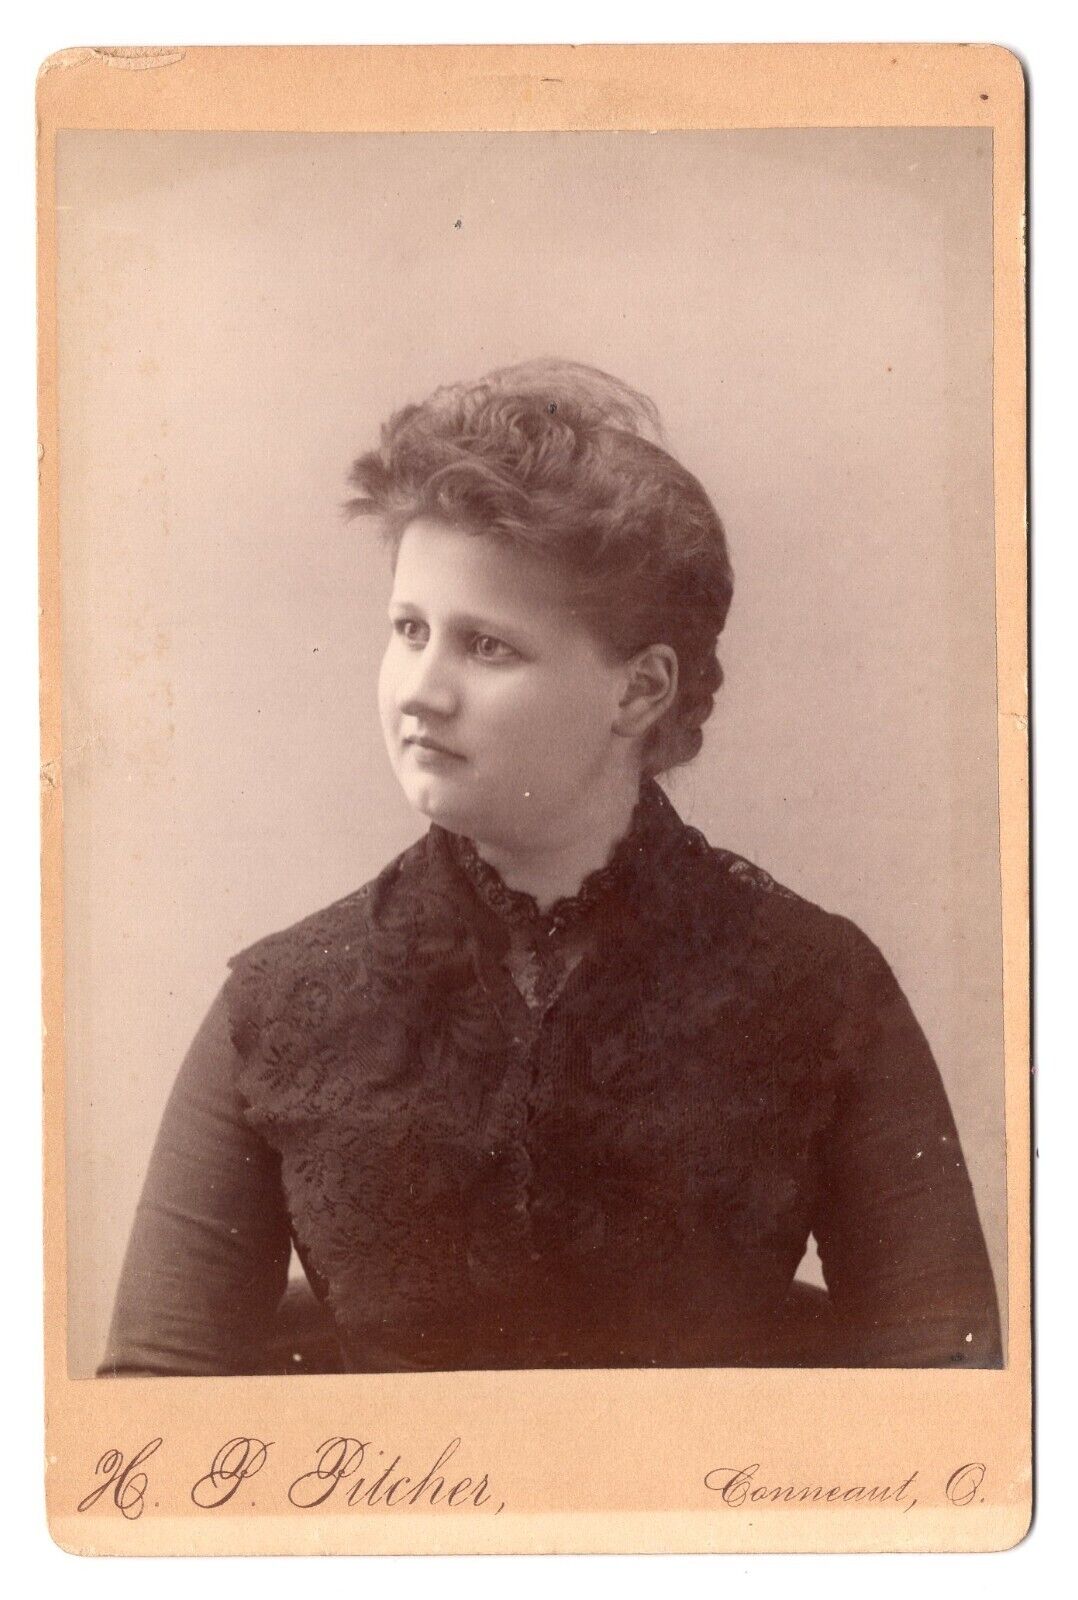 CONNEAUT OH 1870s 1880s Young Woman in Black Lace No ID Cabinet Card by PITCHER